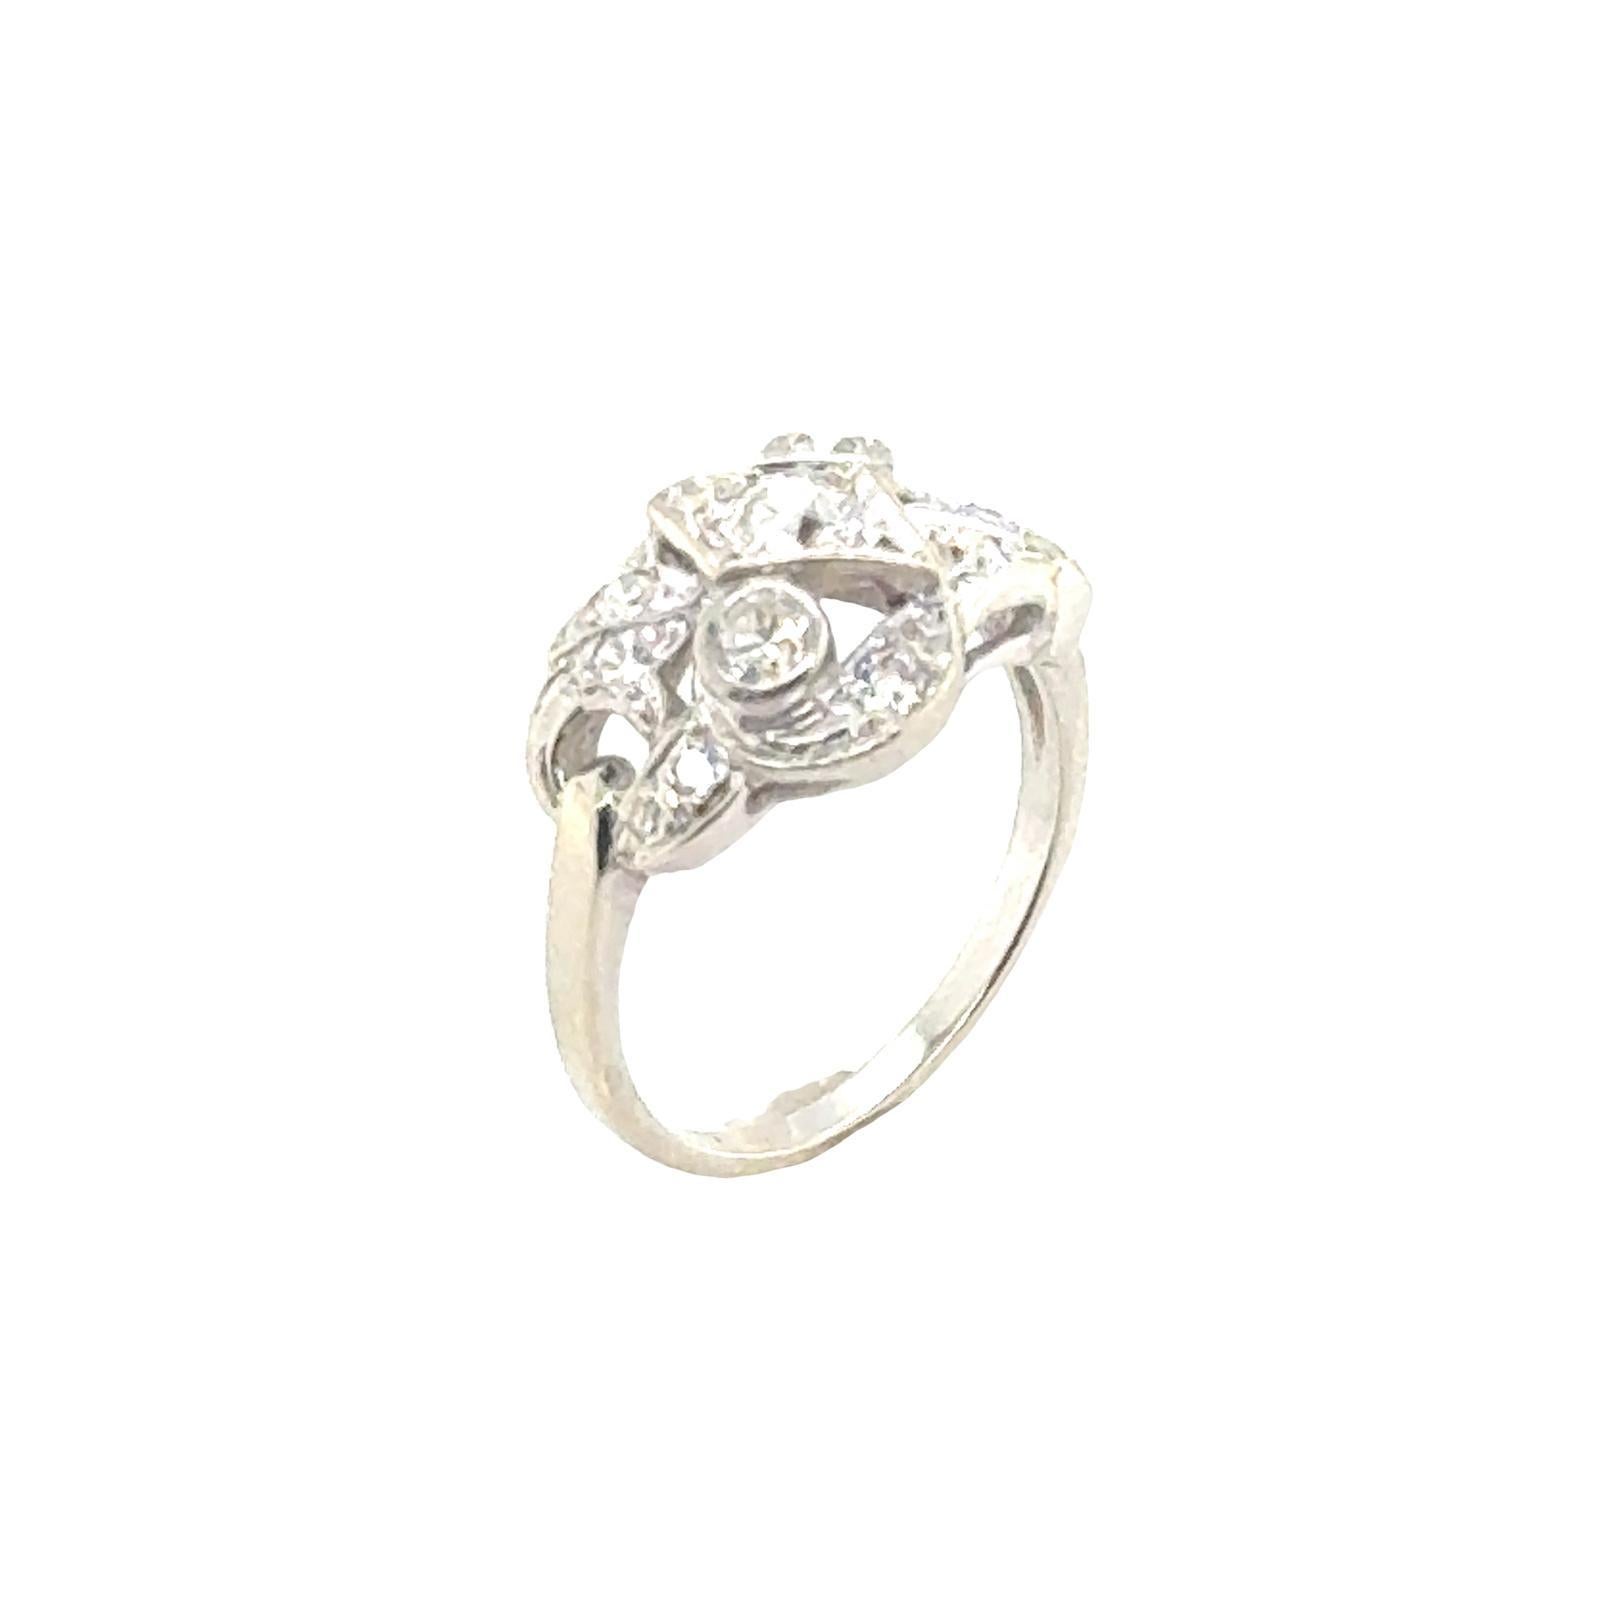 1940's Diamond 14 Karat White Gold Vintage Cocktail Ring In Excellent Condition For Sale In Boca Raton, FL